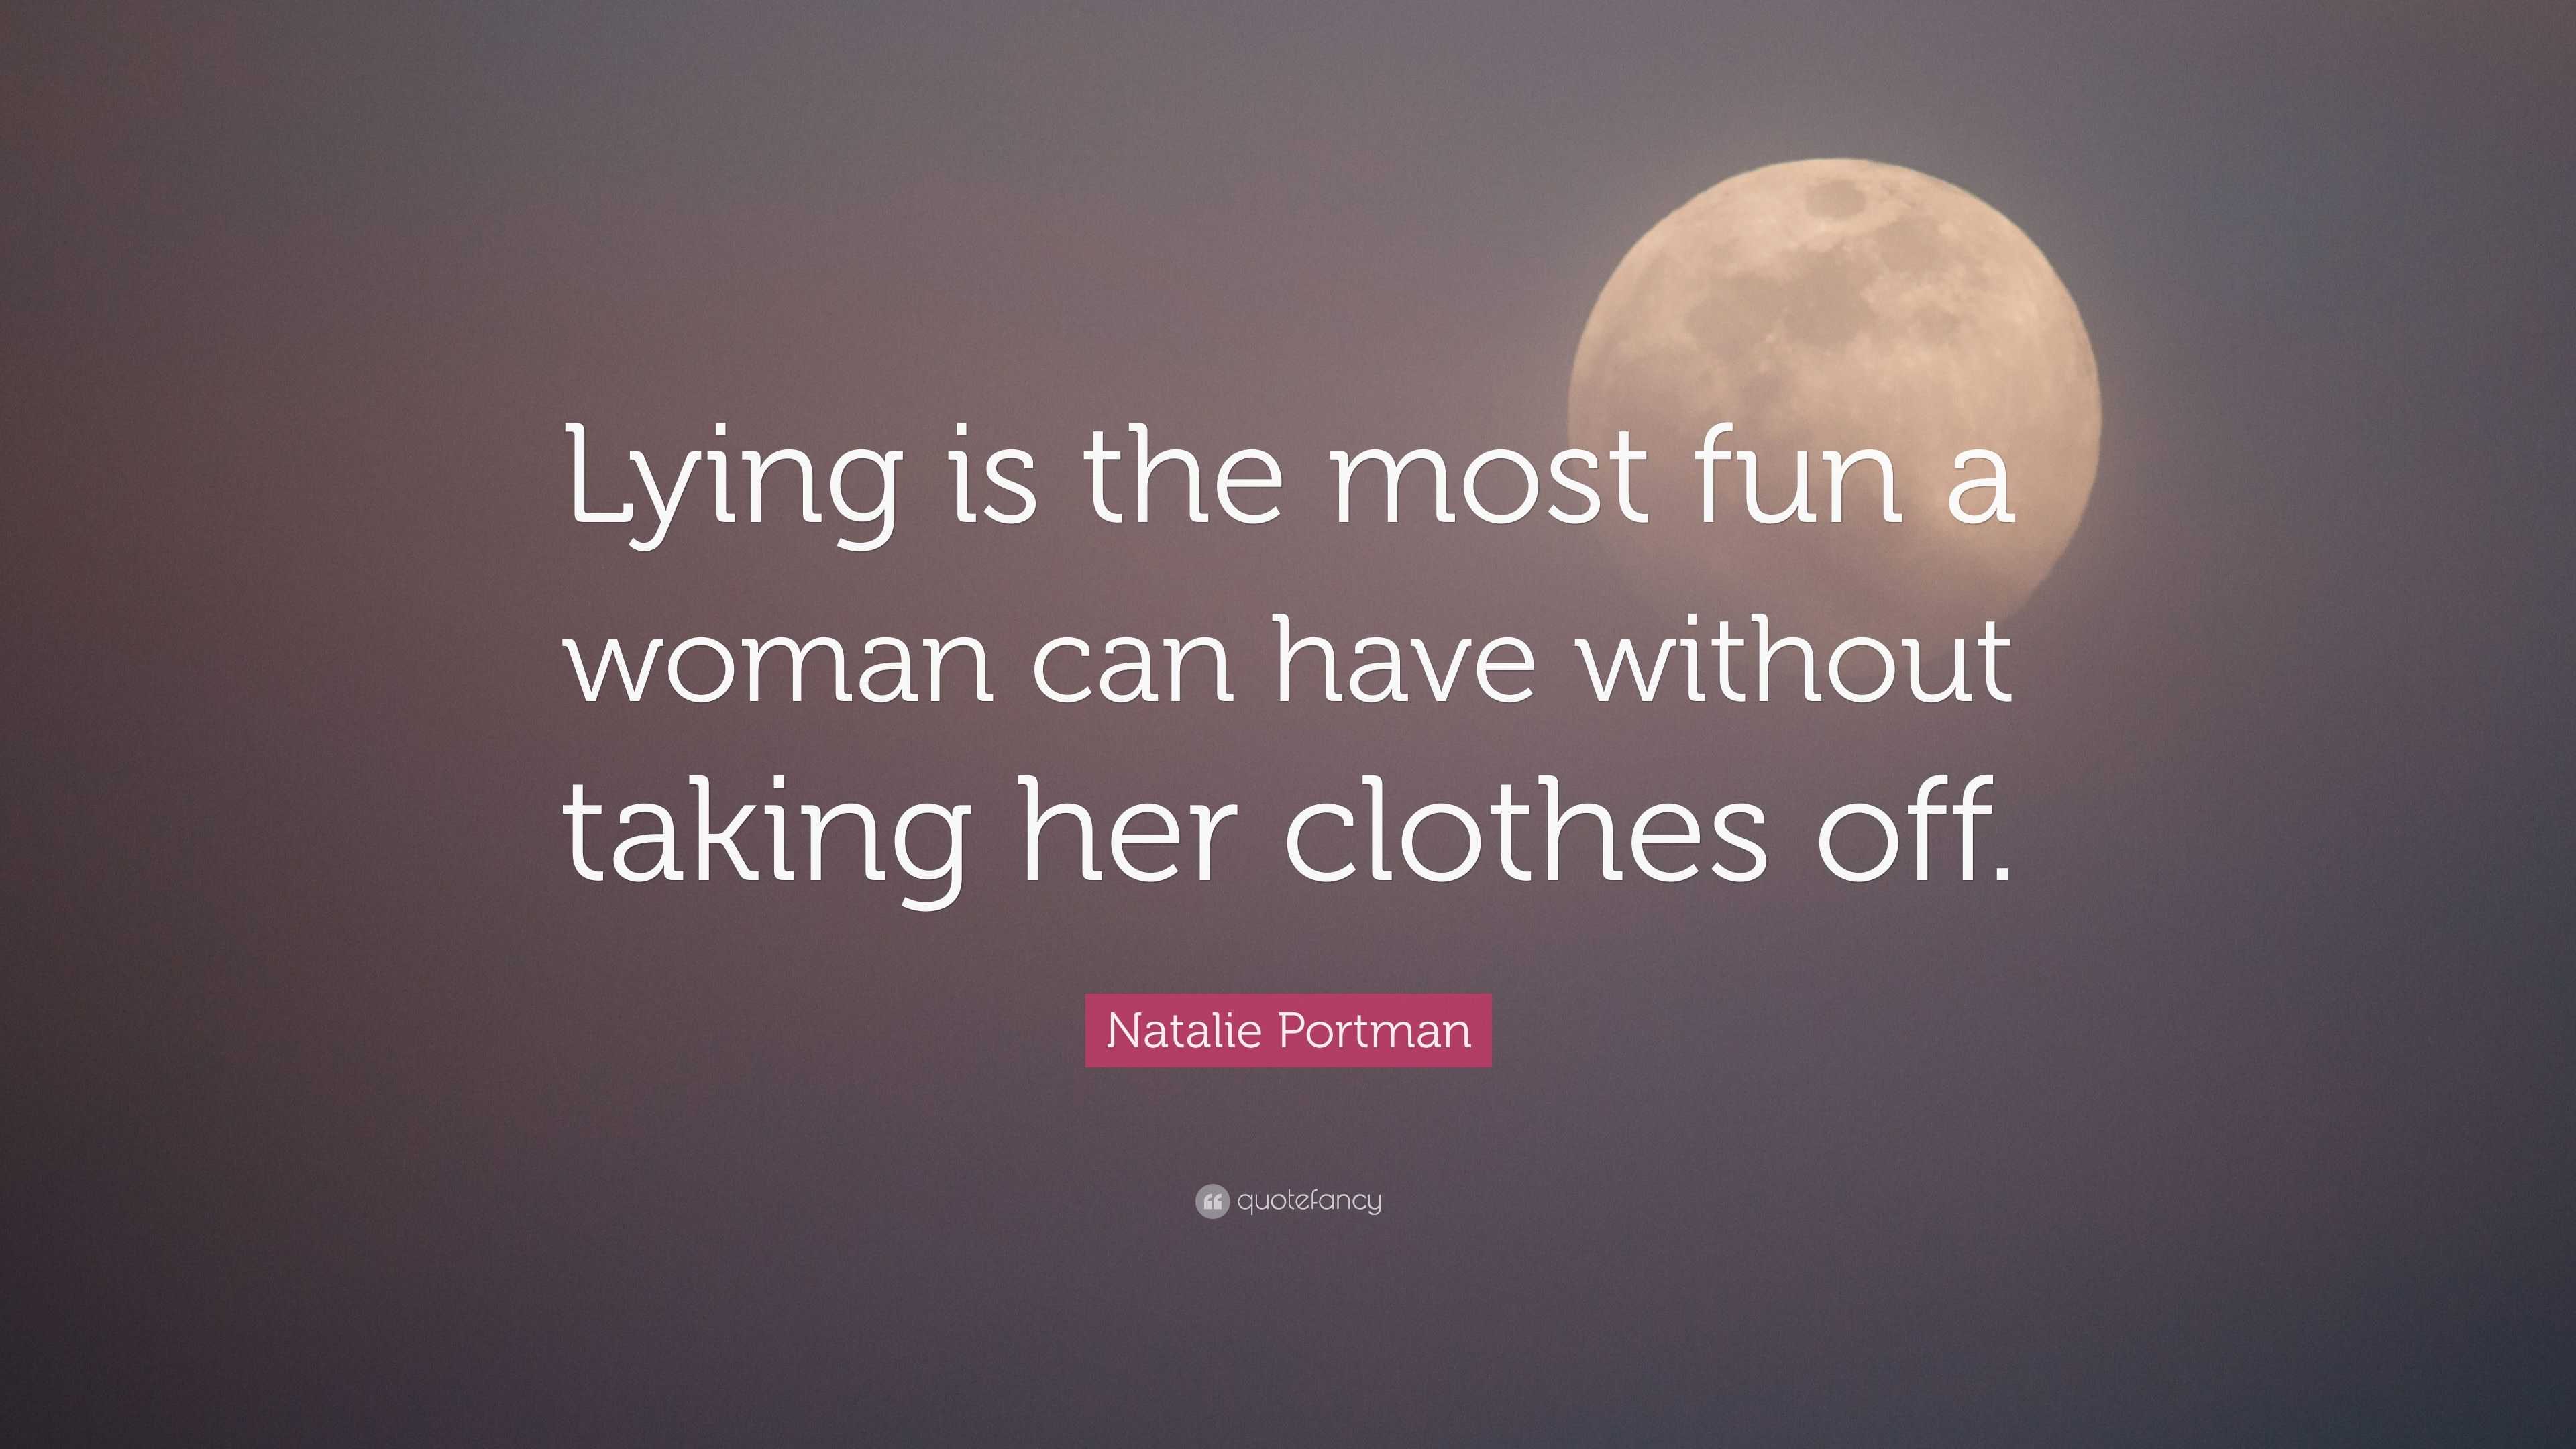 Natalie Portman Quote “Lying is the most fun a woman can have without